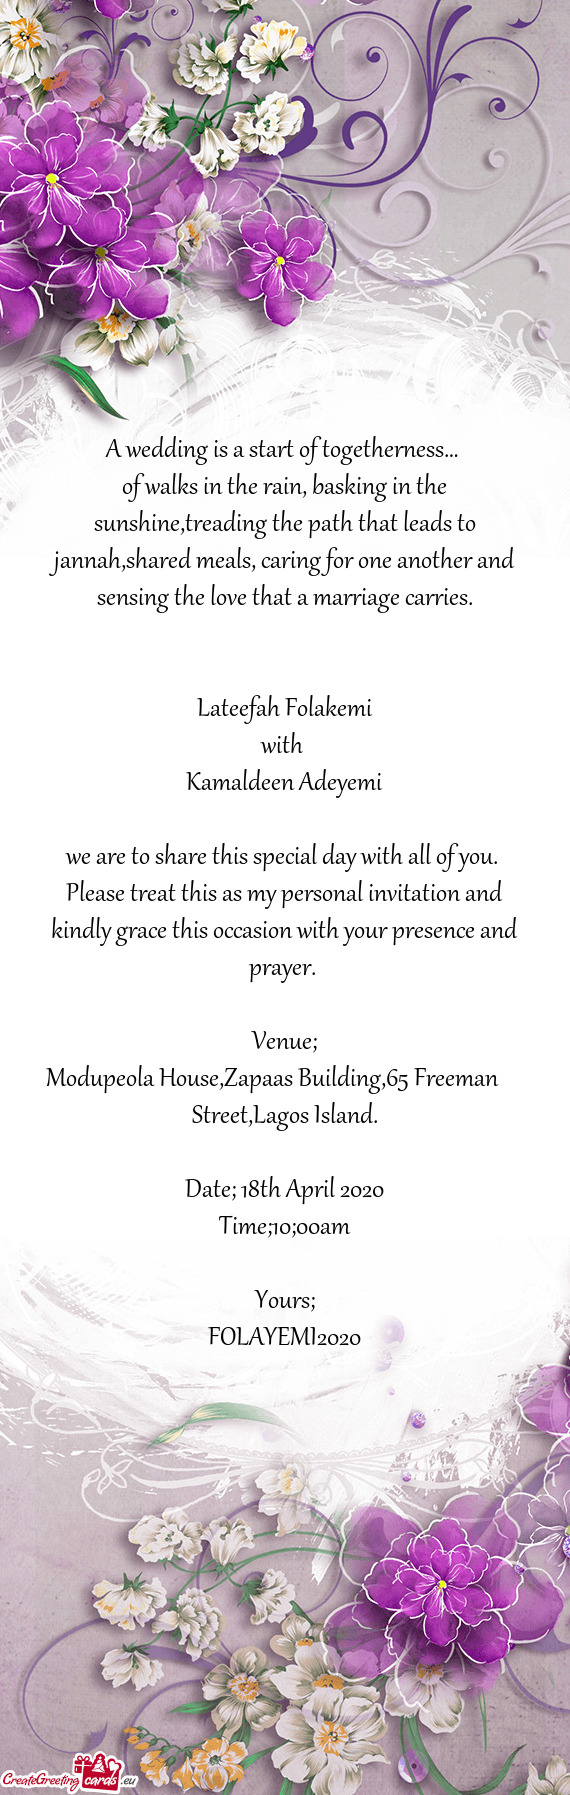 Please treat this as my personal invitation and kindly grace this occasion with your presence and pr